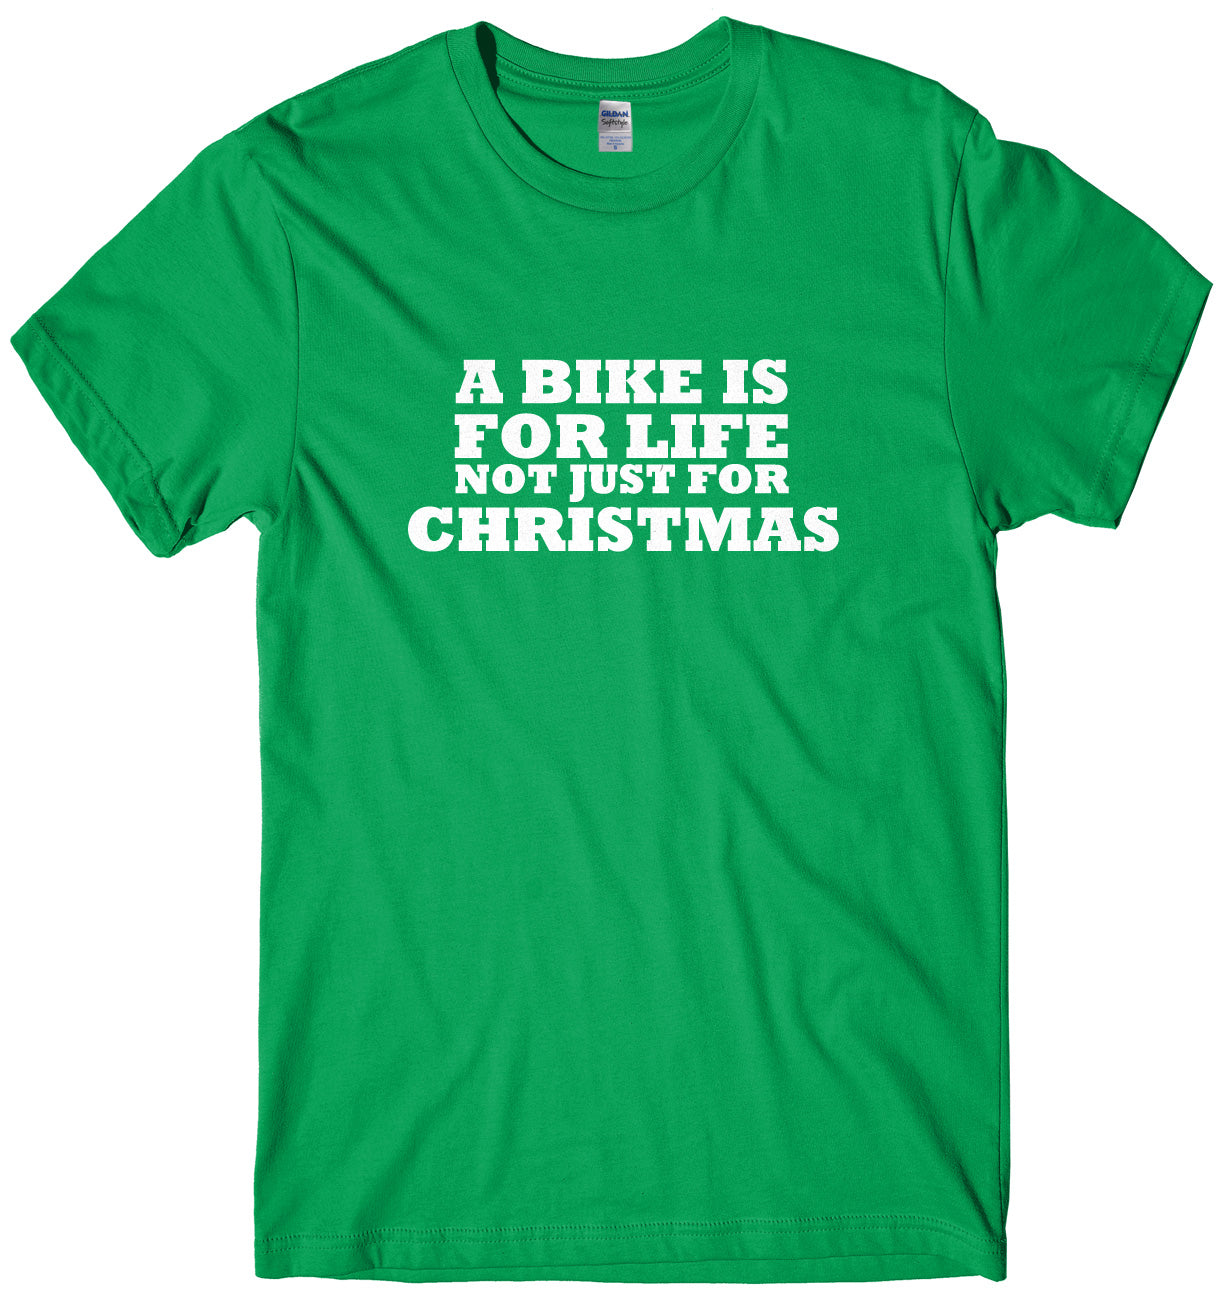 A Bike Is For Life Not Just For Christmas Mens Unisex Christmas T-Shirt